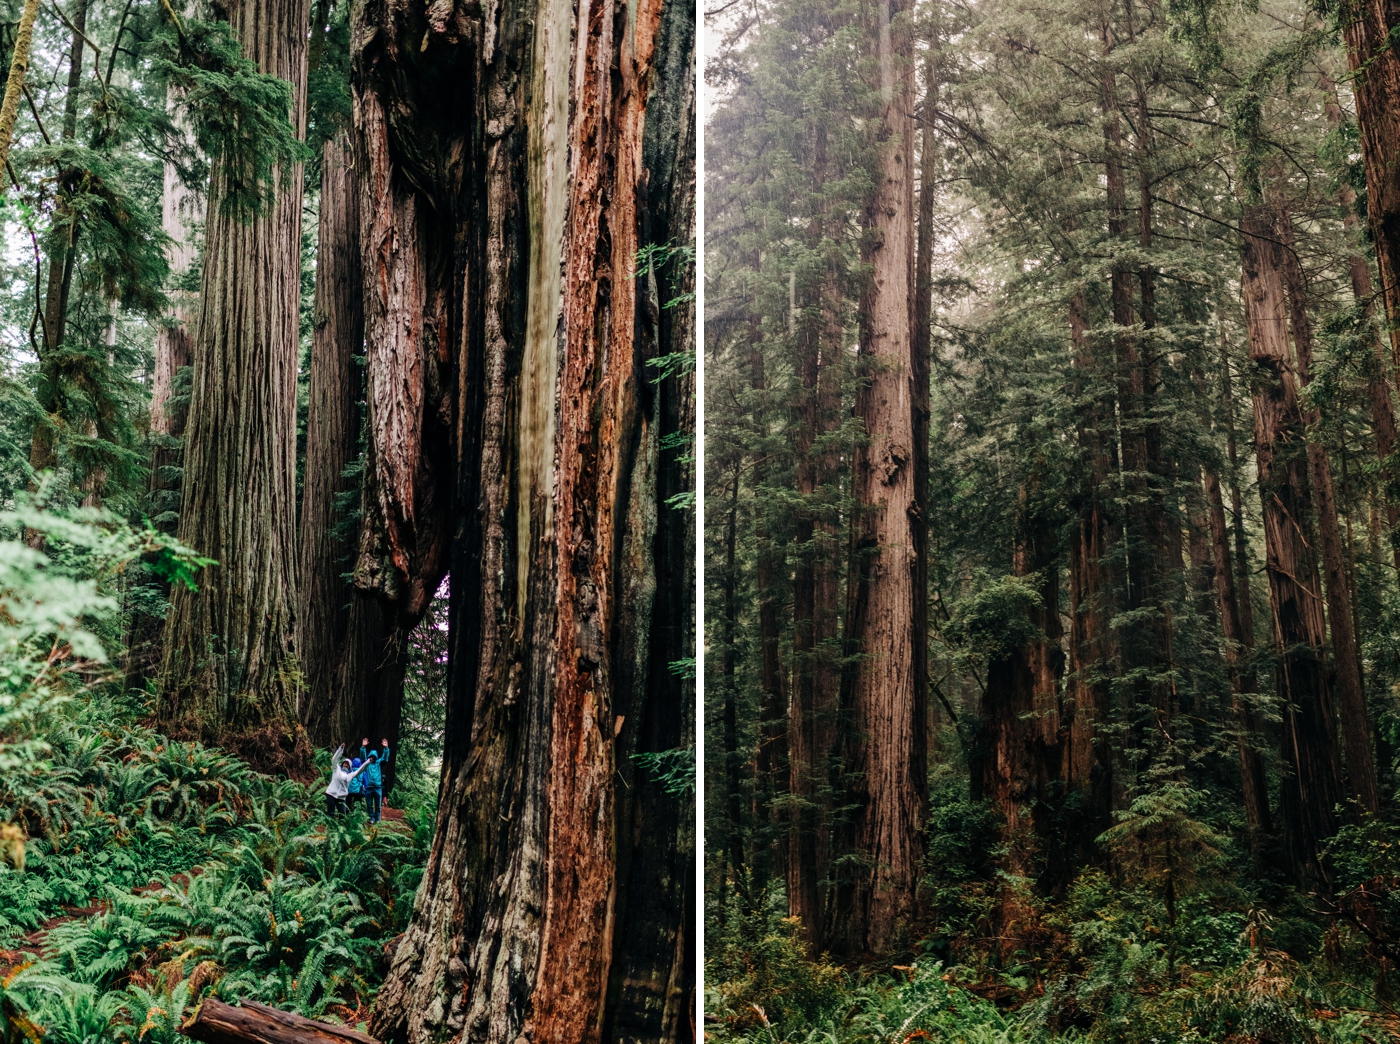 Our family trip to Redwood National Park